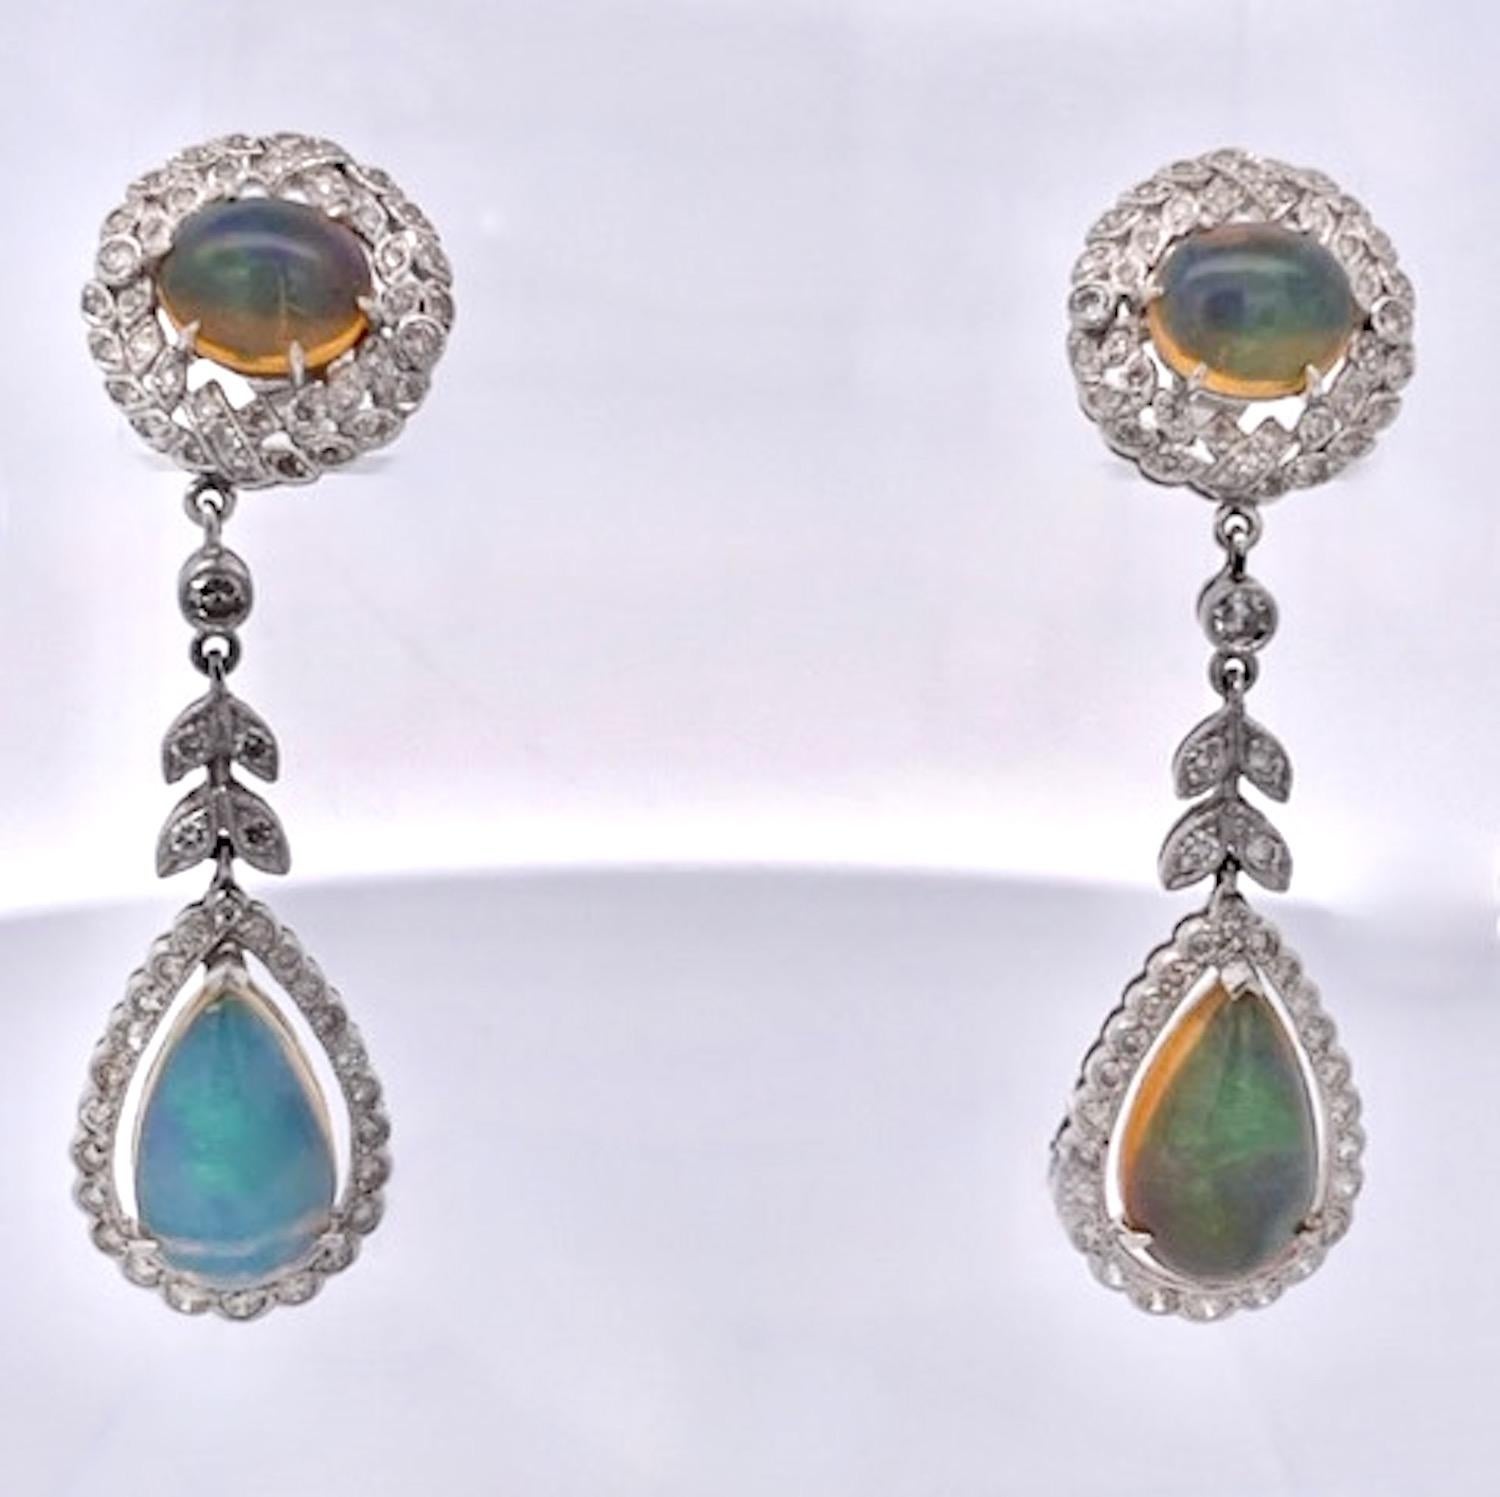 These beautiful Jelly Opals are special.  These Jelly Opal Drop earrings are 4.5cm long with a pear shaped Opal drop of approximately 4 carats and a top Round Opal of 2.25 carats to total 12.50 carats.  These Opals have a Diamond surround on both